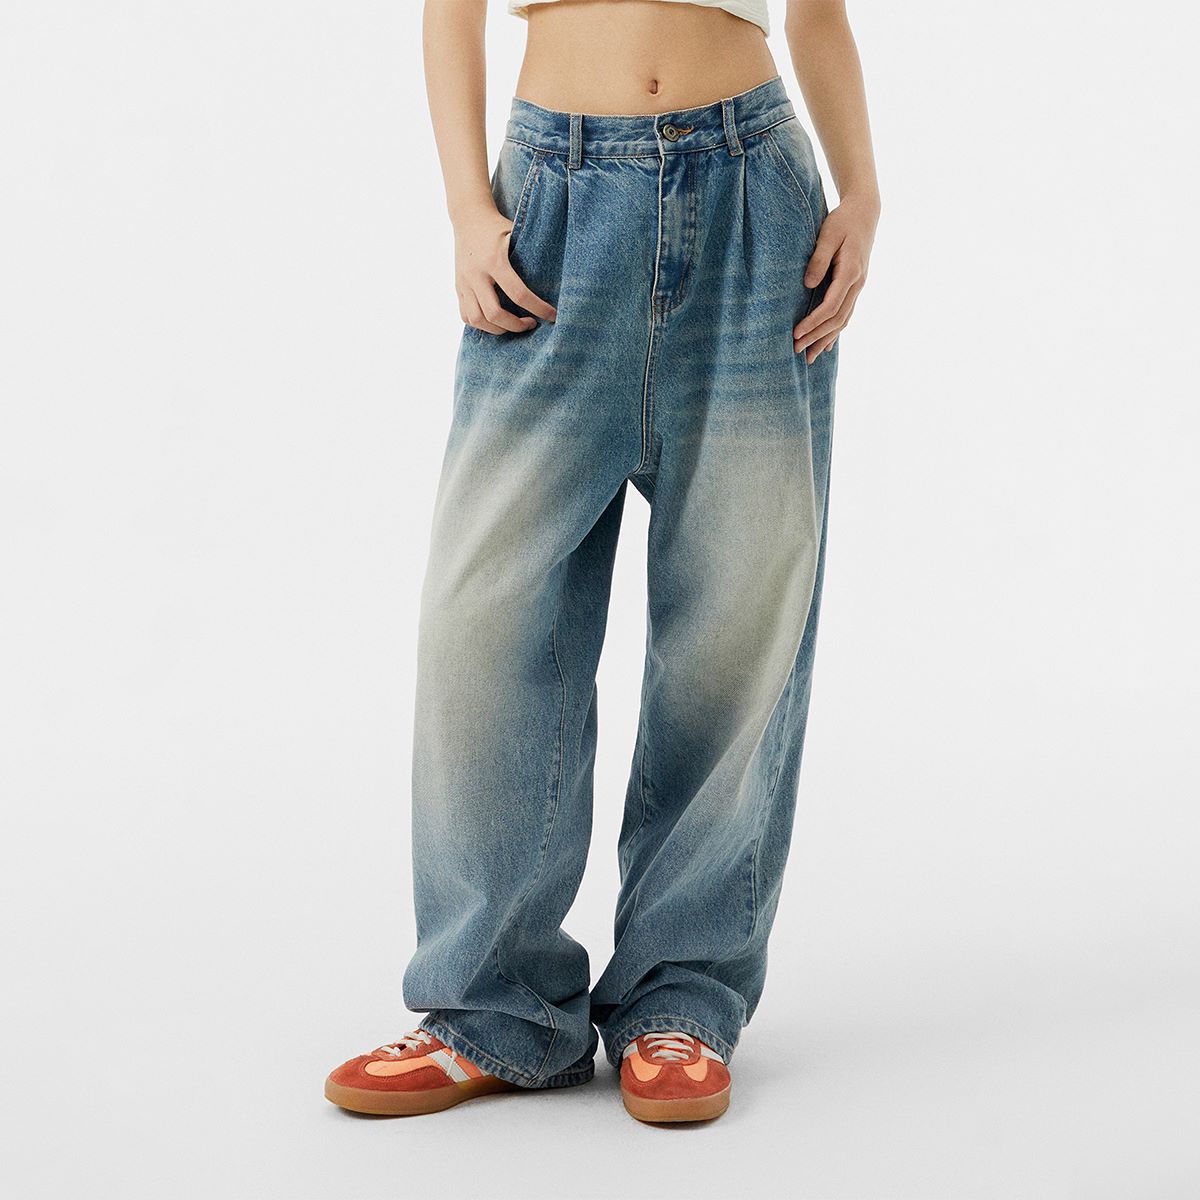 FMACM 23AW Washed Vintage Relaxed Jeans